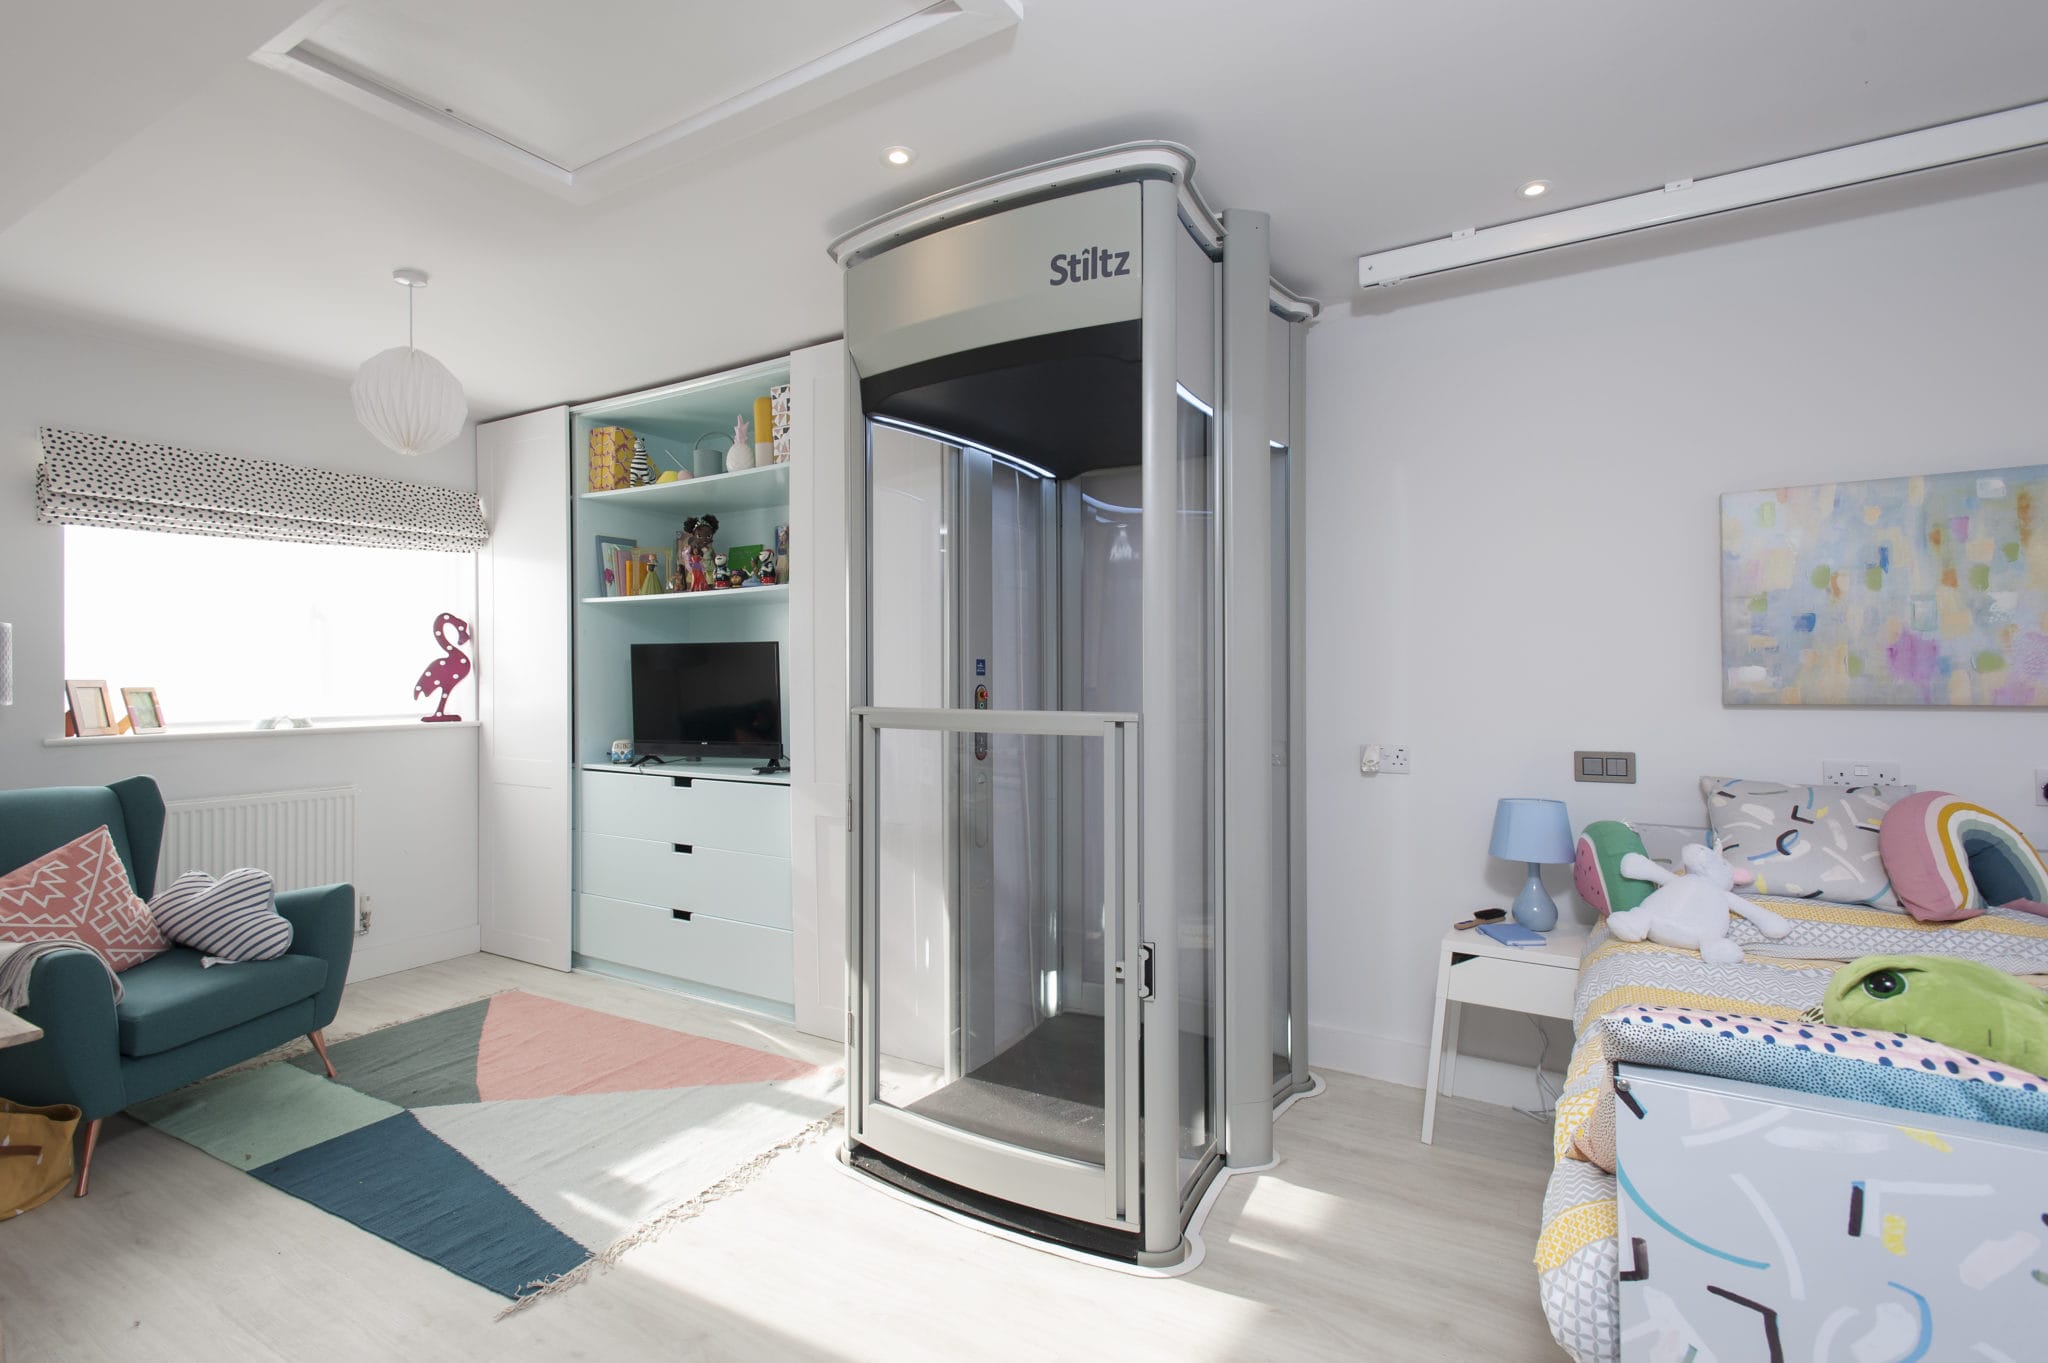 DESIGNERS AND ARCHITECTS CAN GO THE DISTANCE AS STILTZ HOMELIFTS REACH NEW HEIGHTS @StiltzLifts